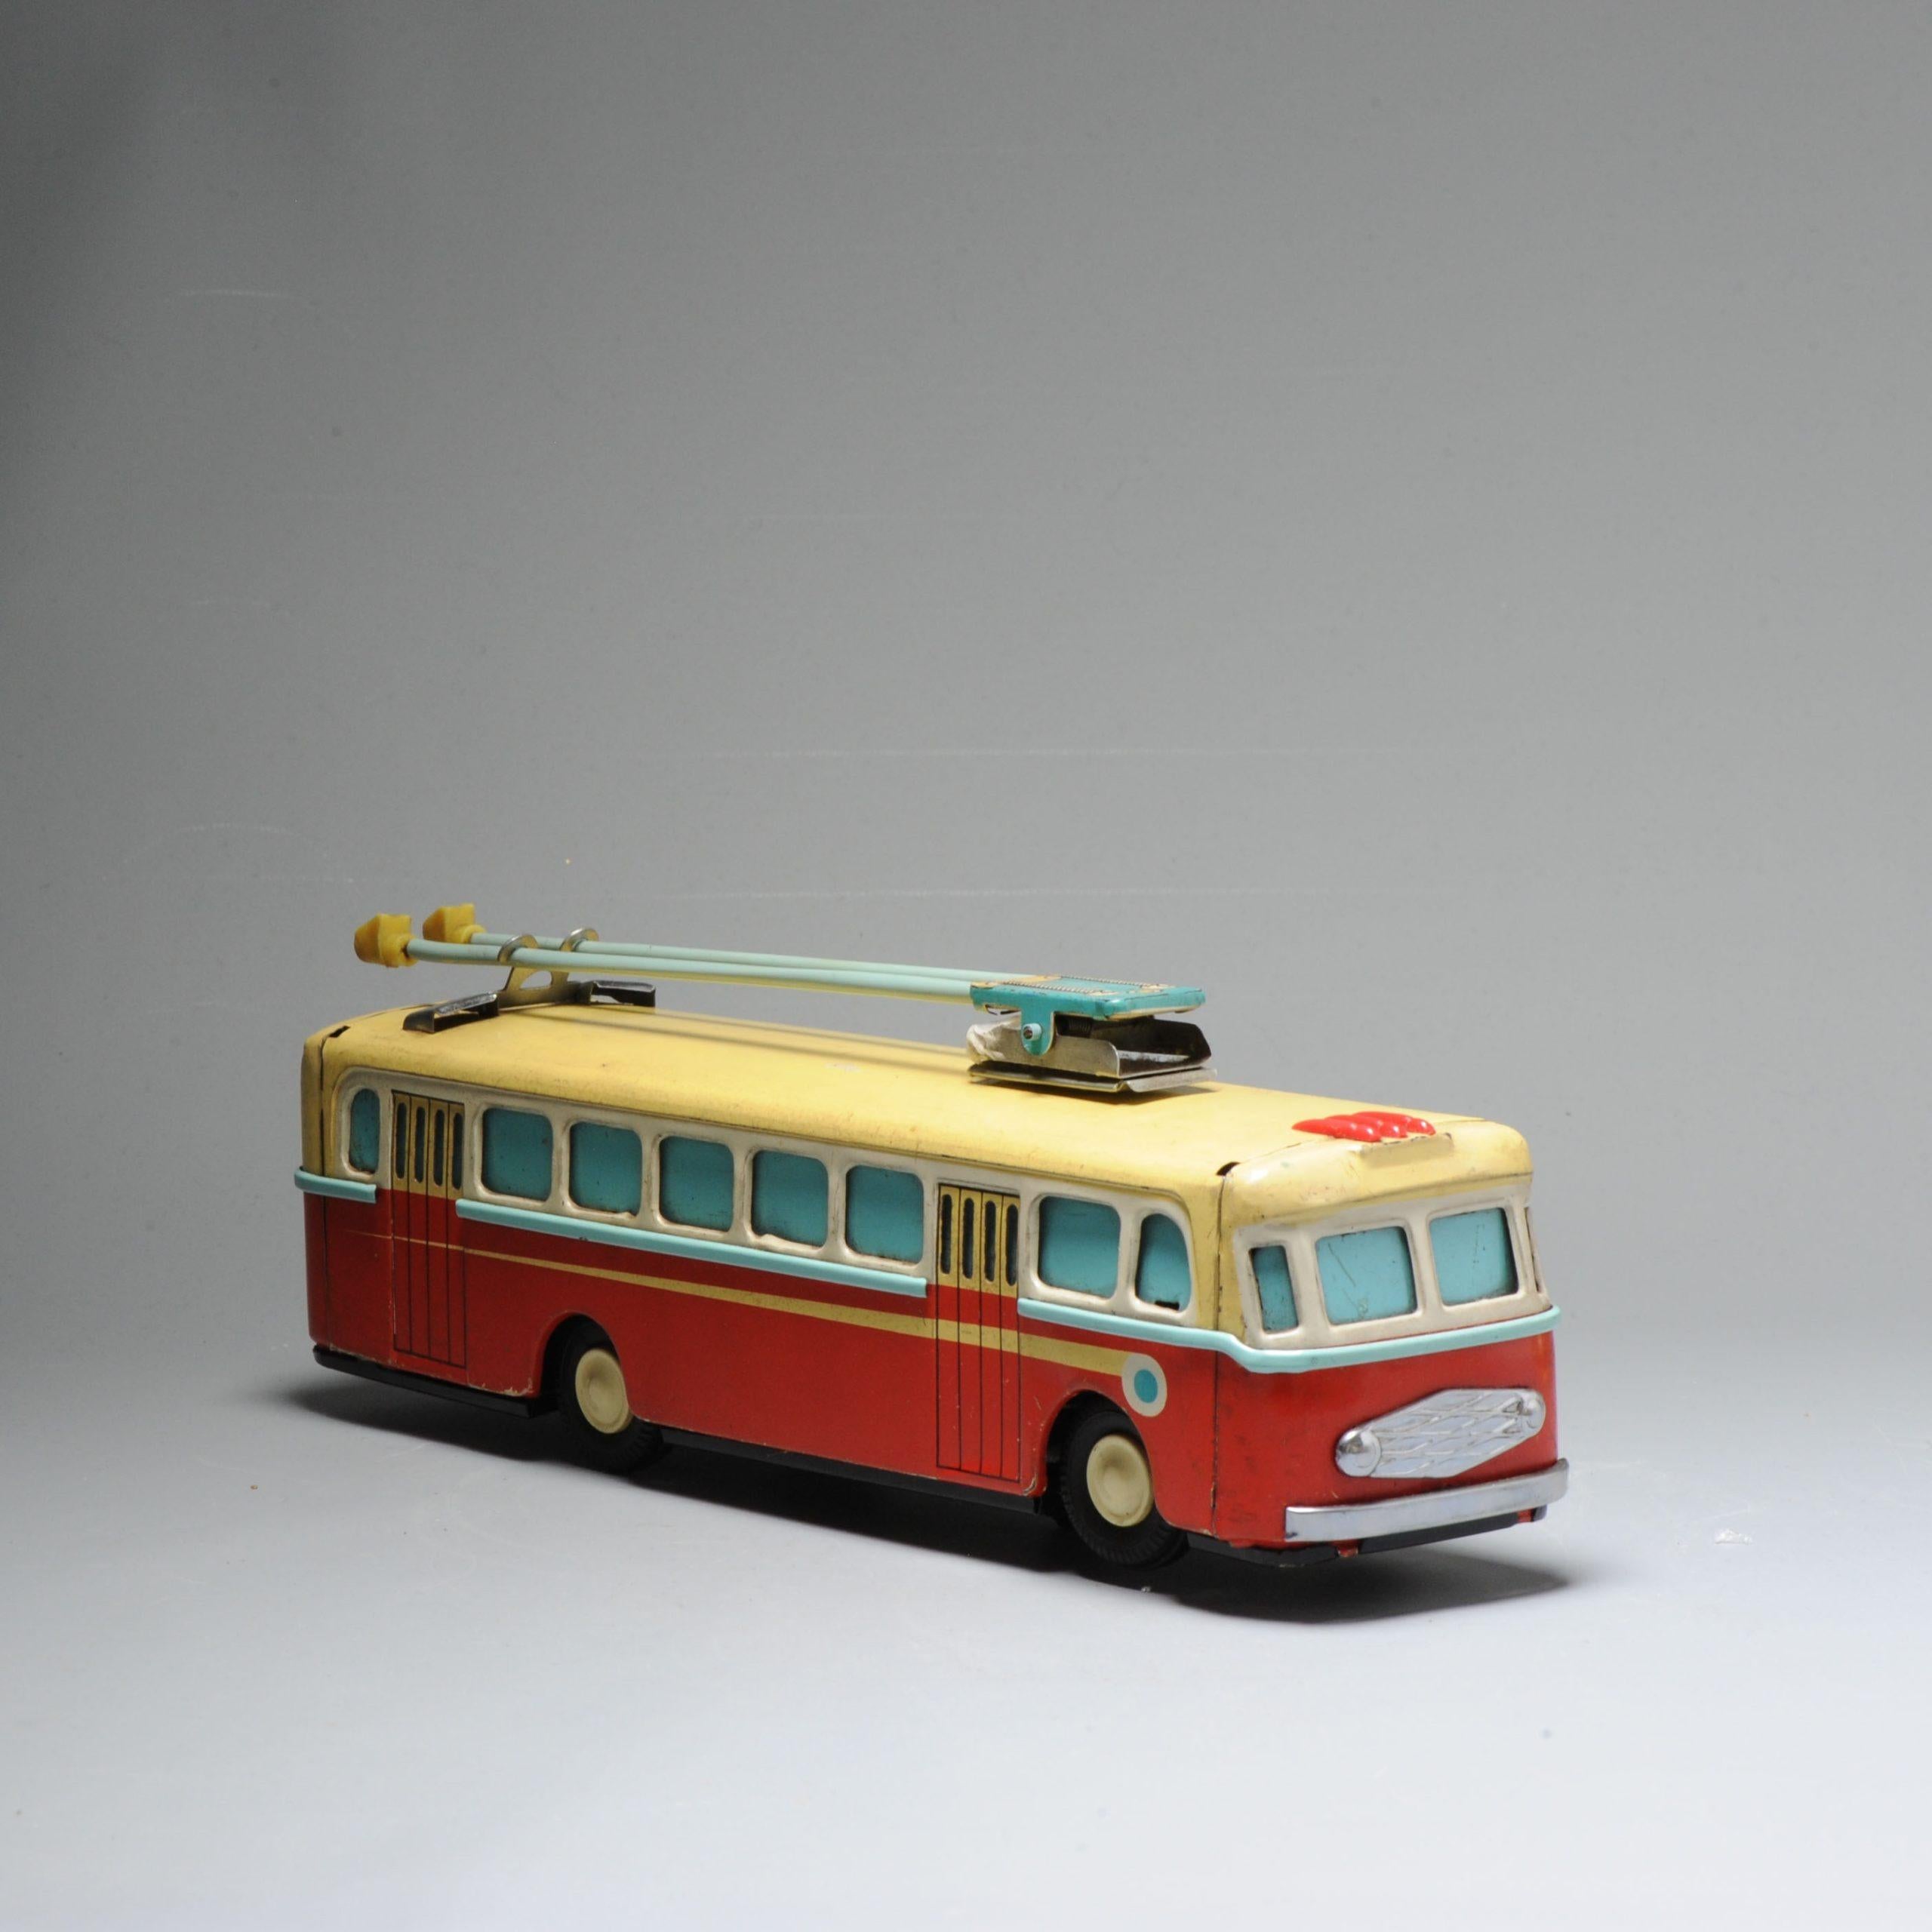 One of the absolute rarest antique Chinese toys made. Antique Red China Tin Toy clockwork. Chinese MS 705 Trolley Bus Shanghai-Rare!

Additional information:
Material: Porcelain & Pottery
Region of Origin: China
Period: 20th